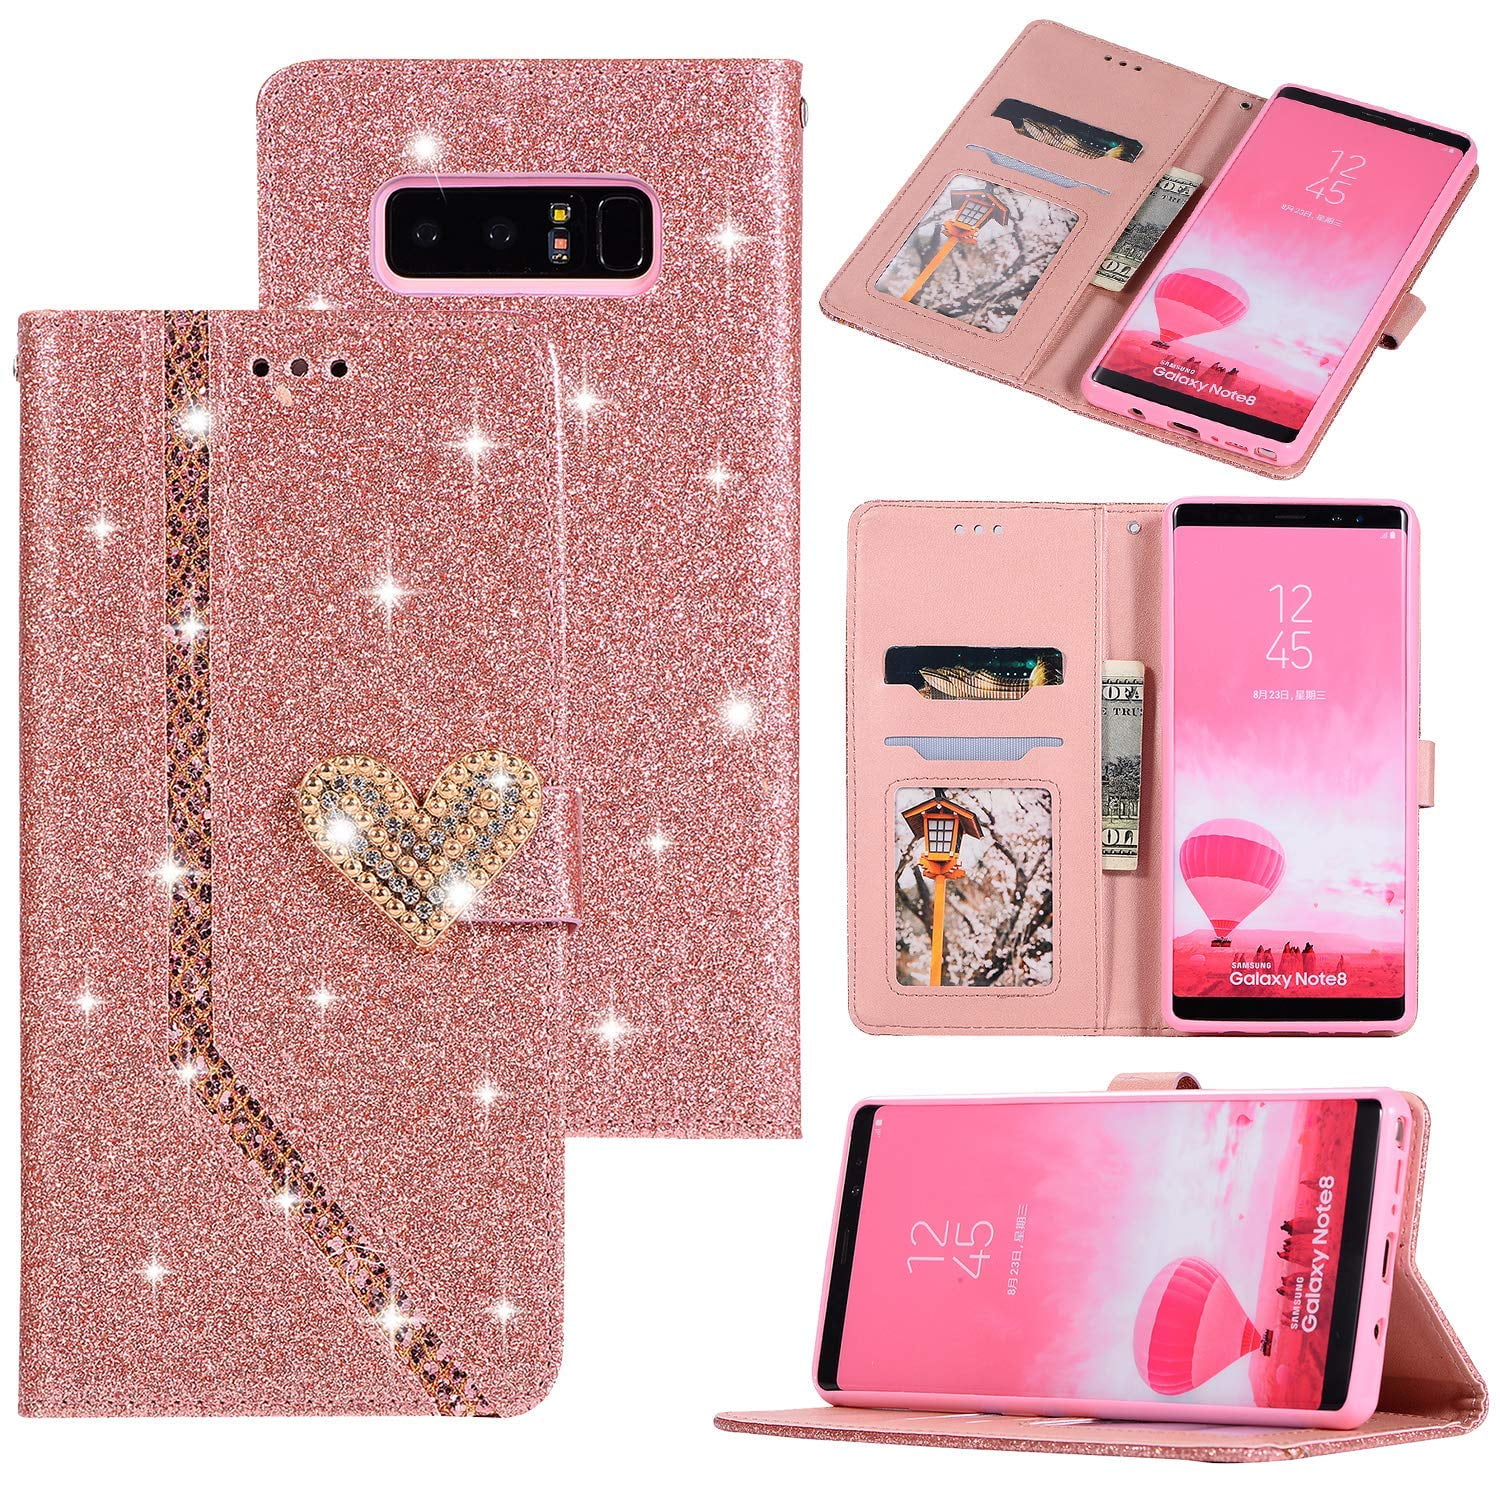 martelen Onvoorziene omstandigheden Voetzool Galaxy Note 8 Case Glitter, Allytech Premium PU Leather Bling Heart  Magnetic Closure Full Body Protective Dust Proof Soft Silicone Back Cover  Wallet Case for Samsung Galaxy Note 8, Rosegold - Walmart.com